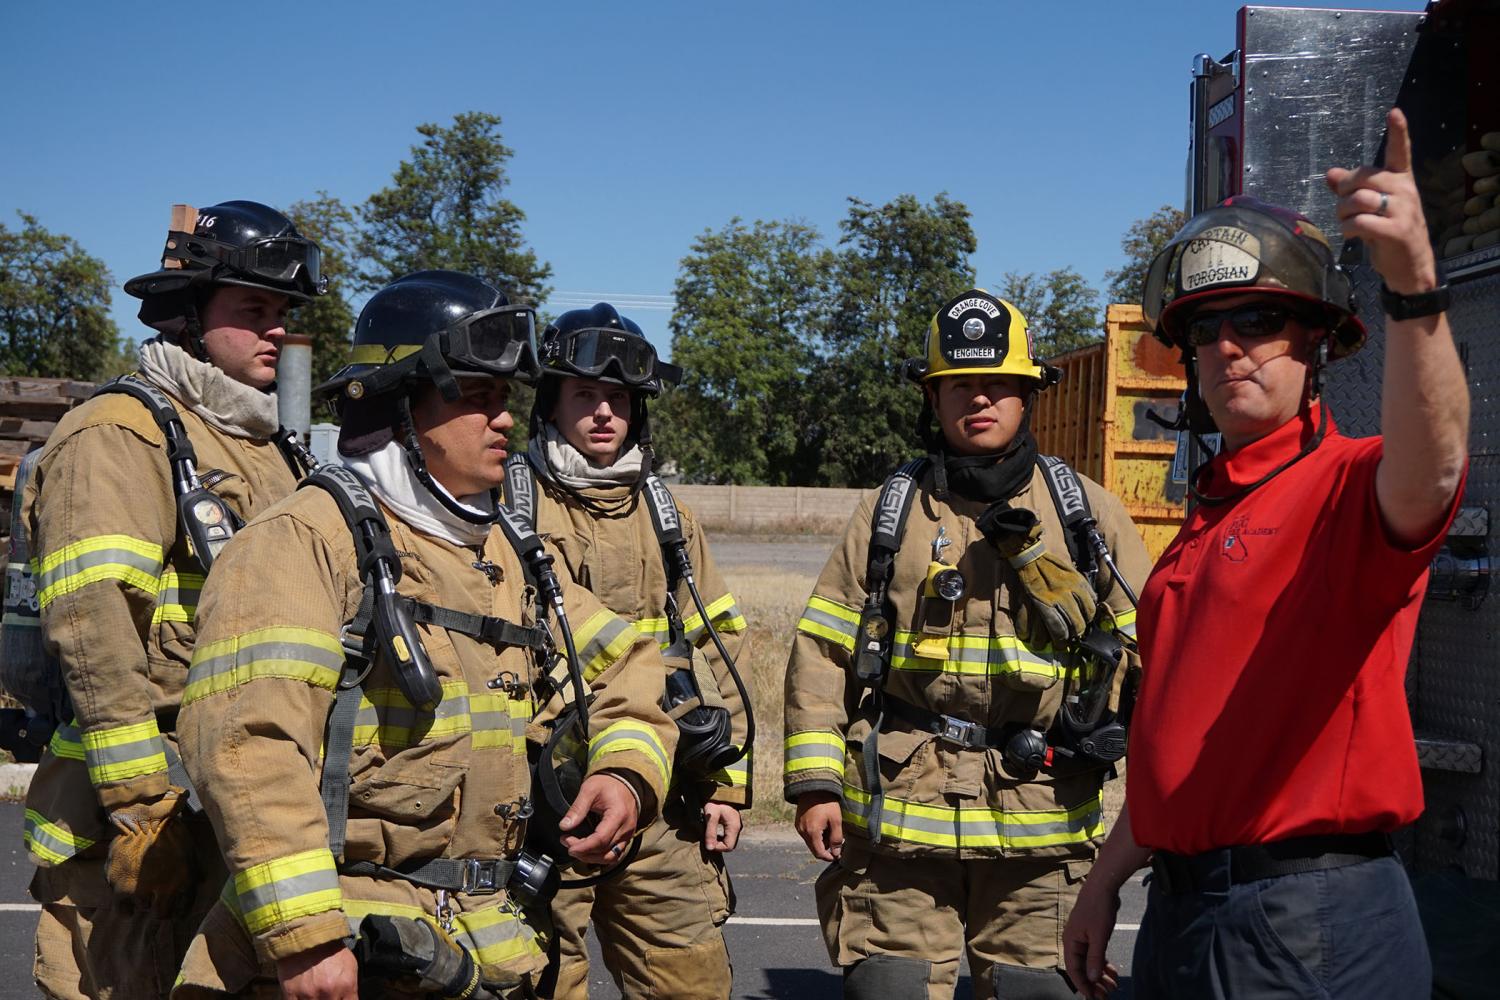 An+instructor+explains+to+the+Fresno+City+College+Fire+Academy+students+what+they+need+to+do+to+salvage+a+simulated+second+story+apartment+at+the+Clovis+Fire+Training+Center+on+Saturday%2C+April+29%2C+2017